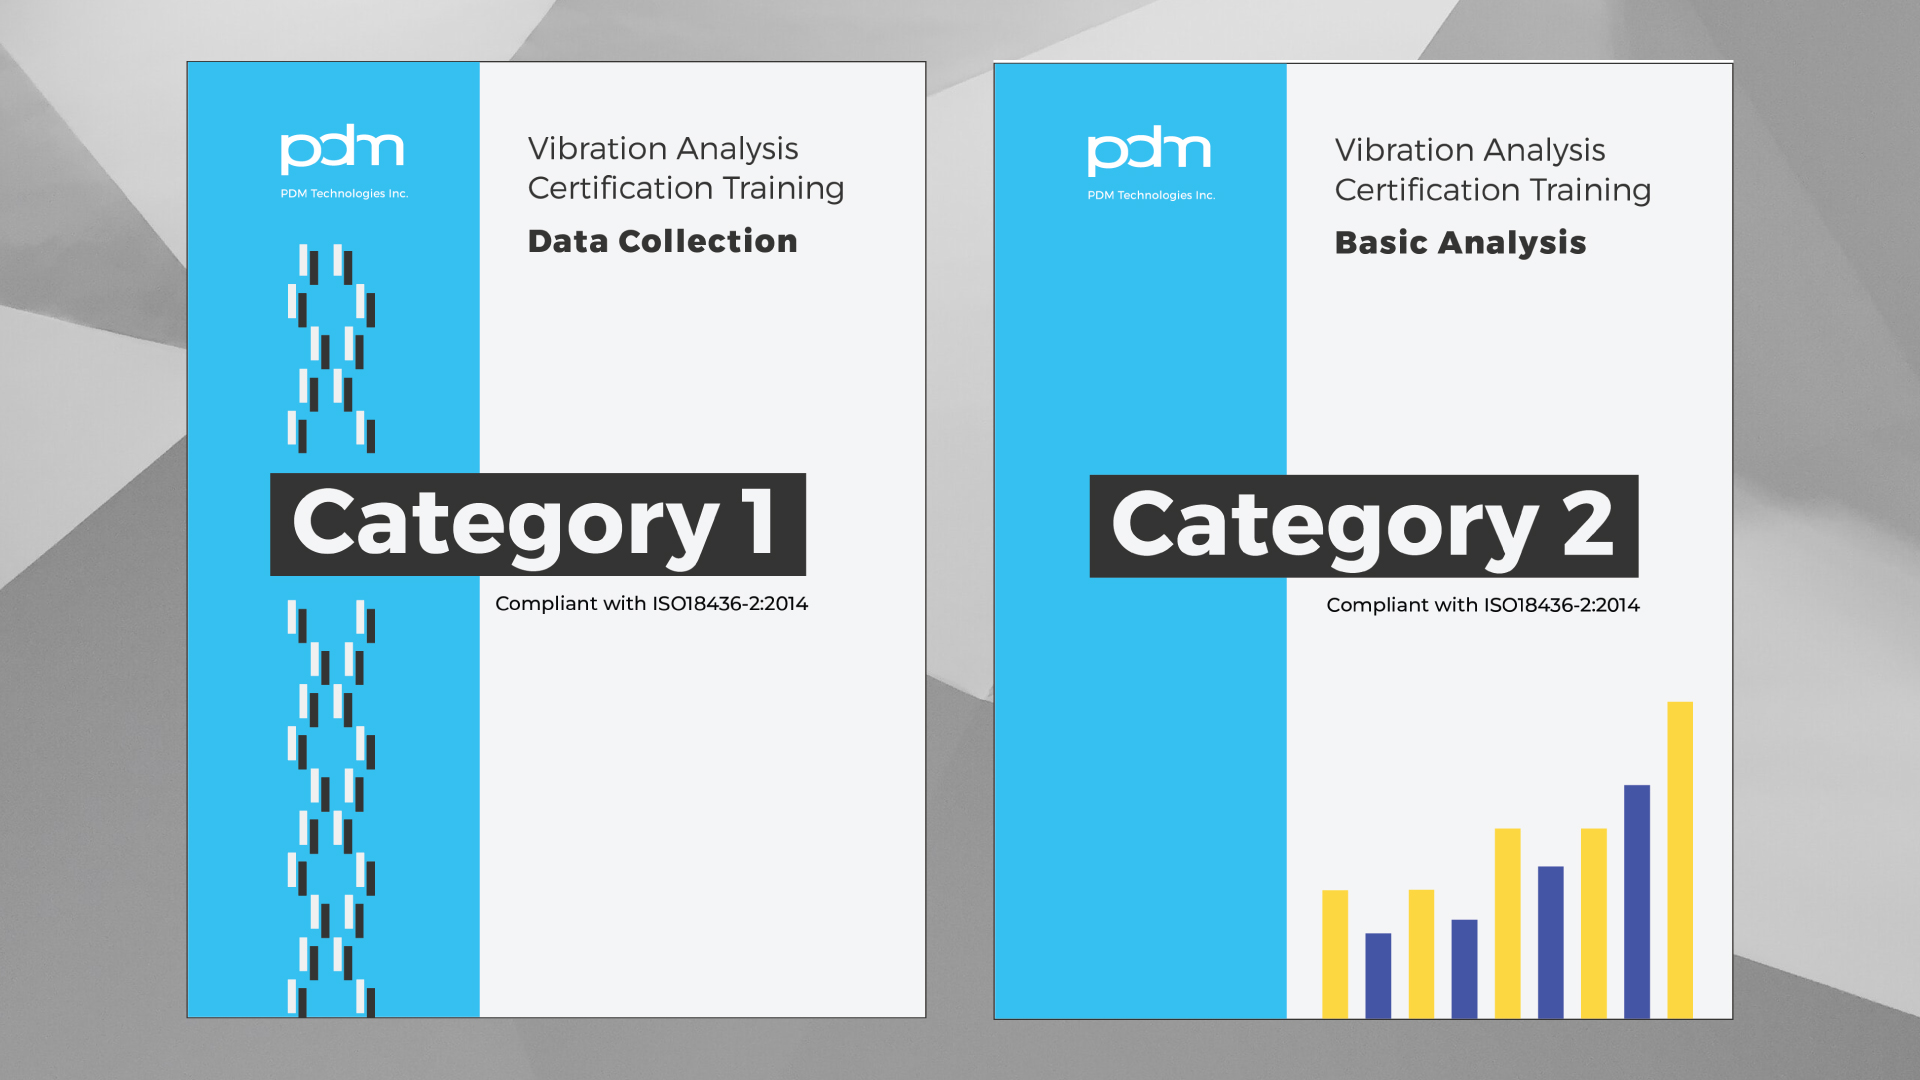 A composite image of PDM Technology Inc.'s training manuals, Category 1 Data Collection and Category 2 Basic Analysis